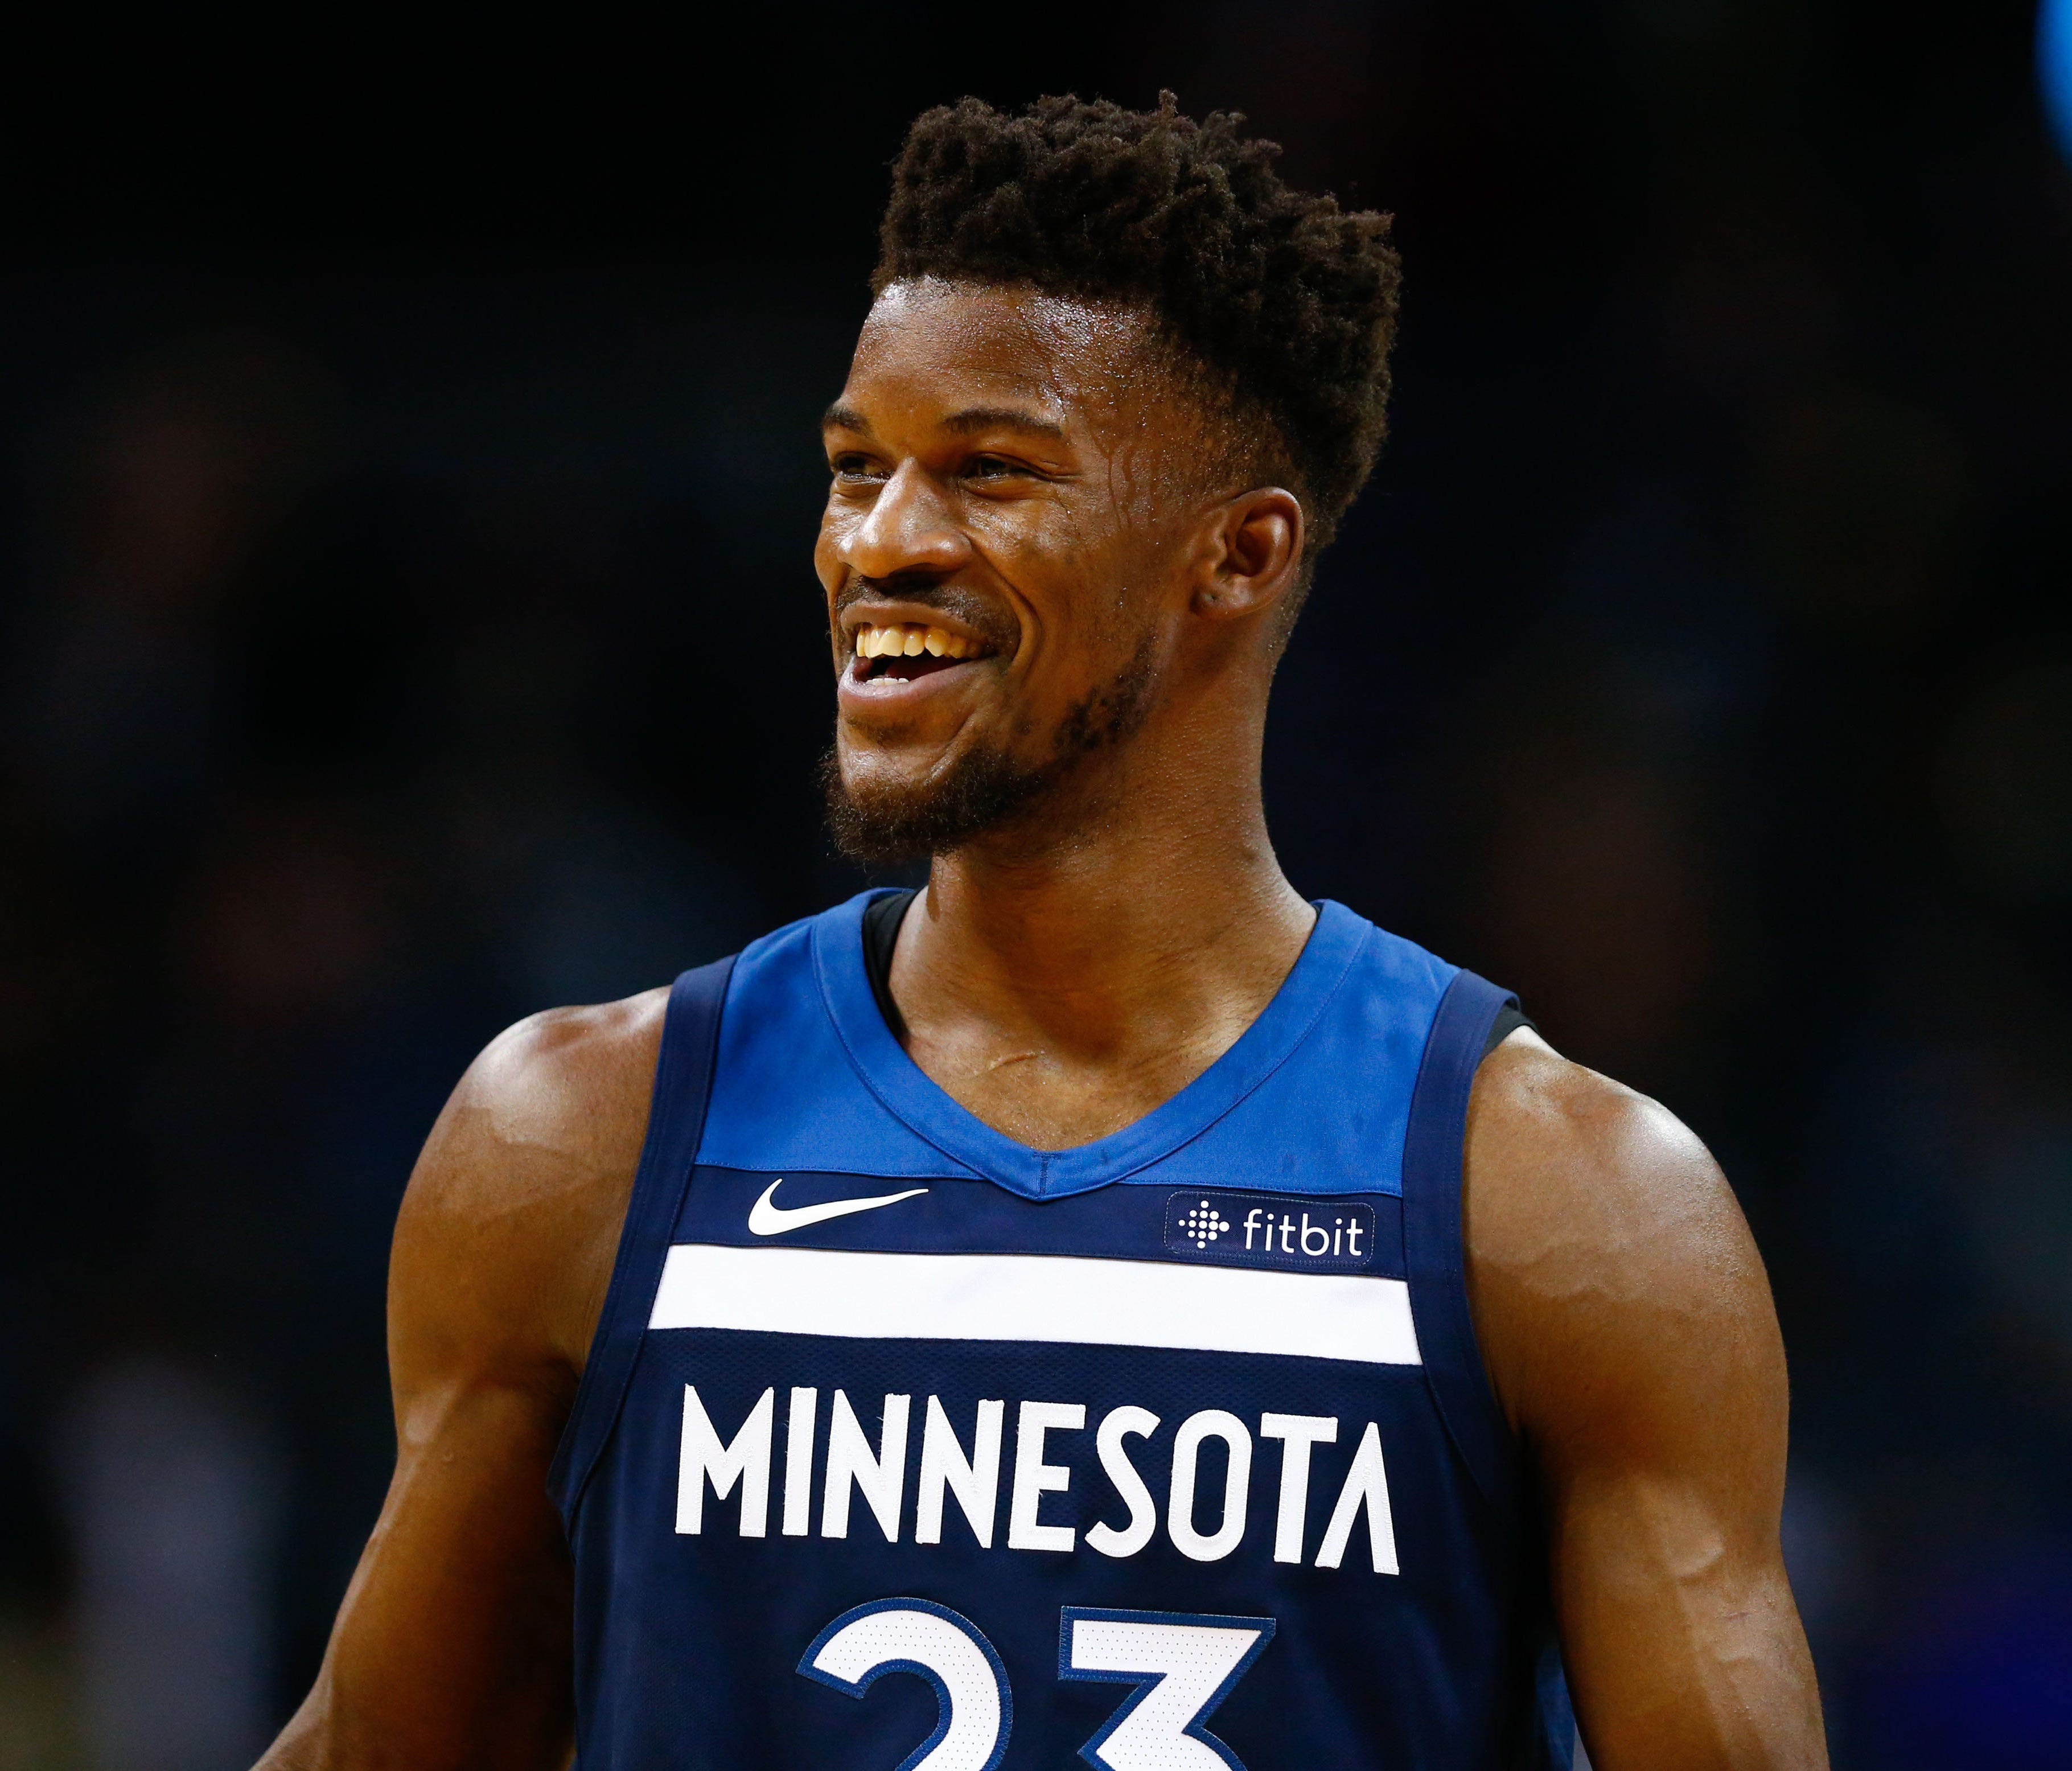 Minnesota Timberwolves guard Jimmy Butler (23) laughs during the second half against the Charlotte Hornets at Spectrum Center.